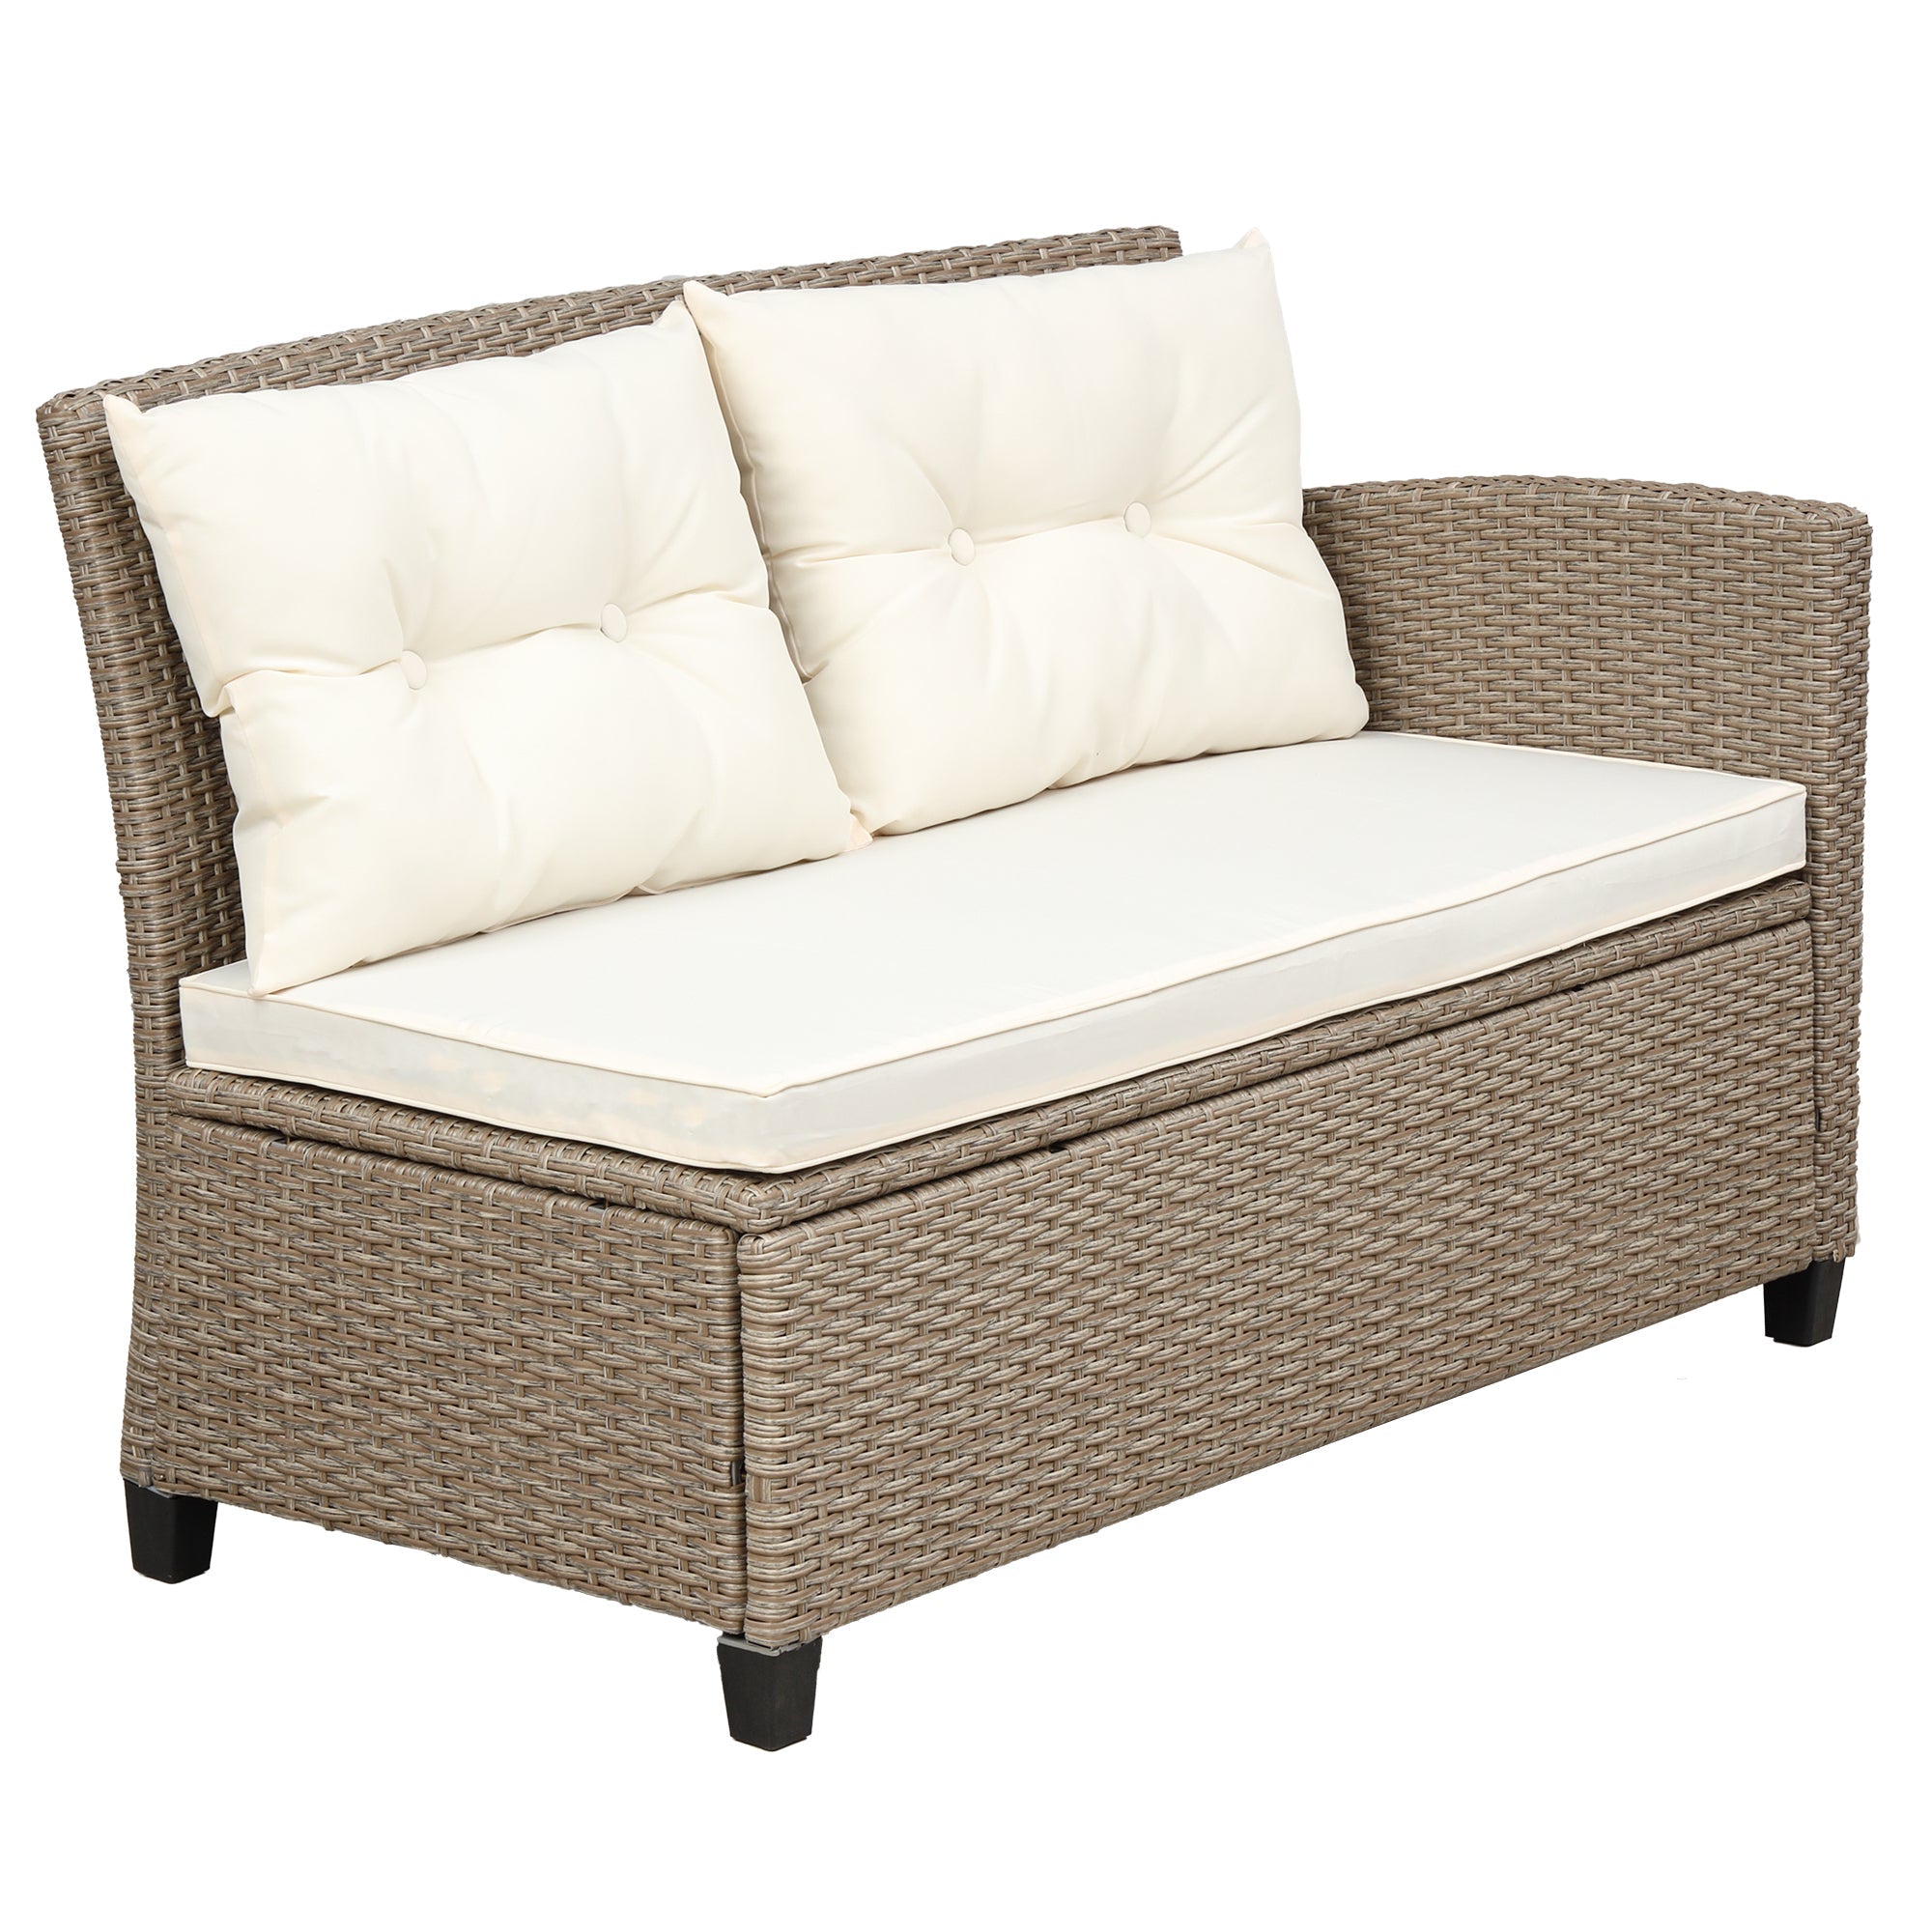 Outdoor Patio Furniture Sets: 4-Piece Conversation Set Wicker Rattan Sectional Sofa with Seat Cushions in Beige Brown | Ideal for Your Outdoor Space-4 Piece Outdoor Sets-American Furniture Outlet